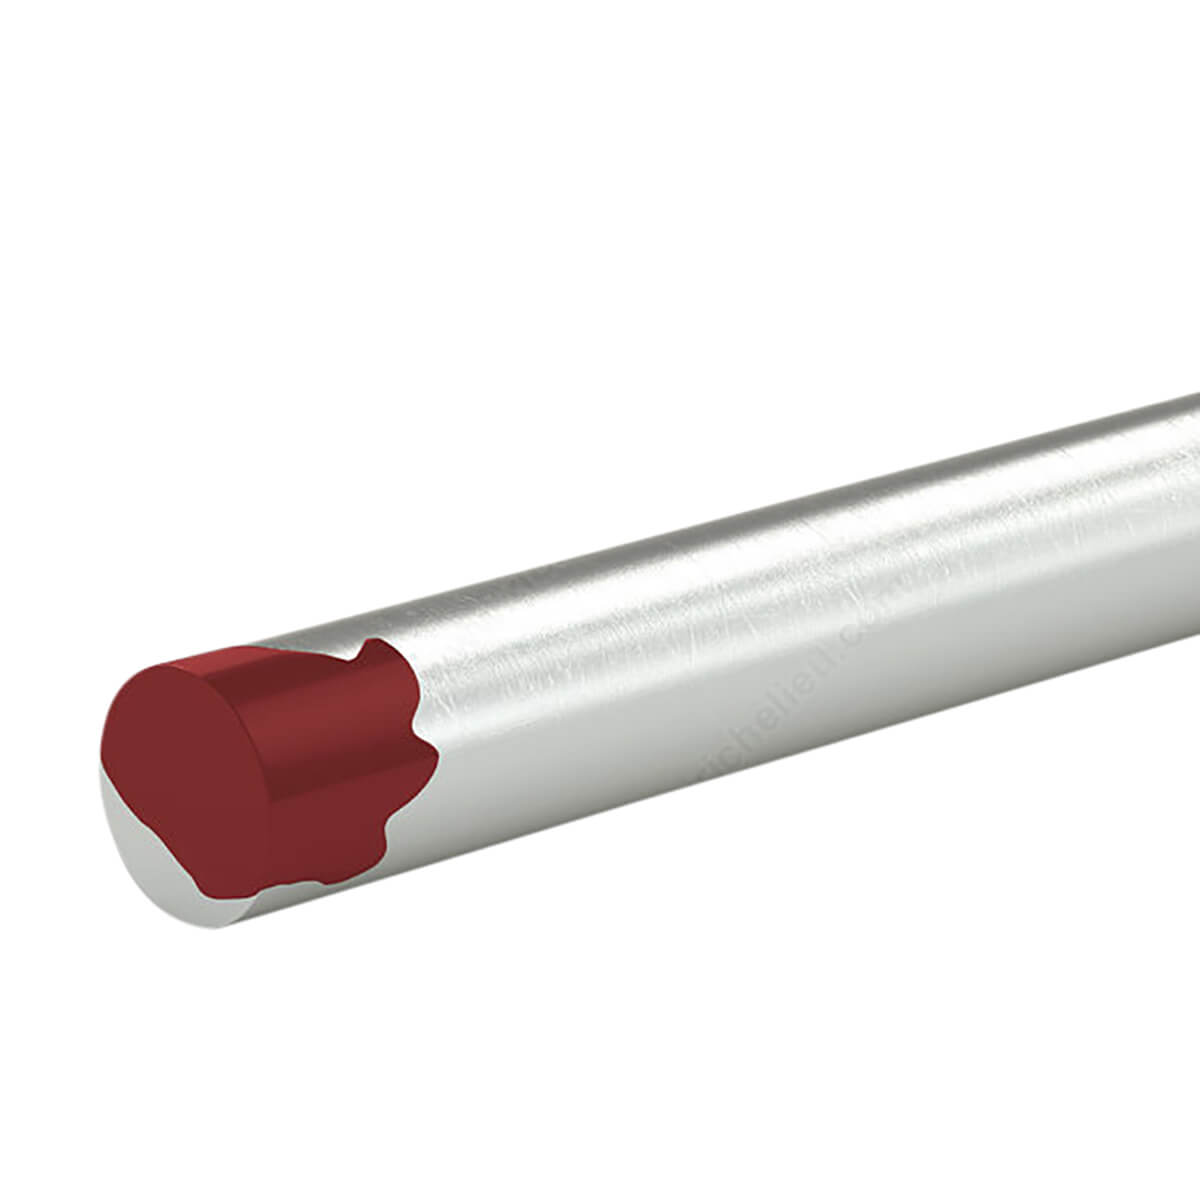 Unthreaded Rod - Red Tip - 5/8-in X 36-in